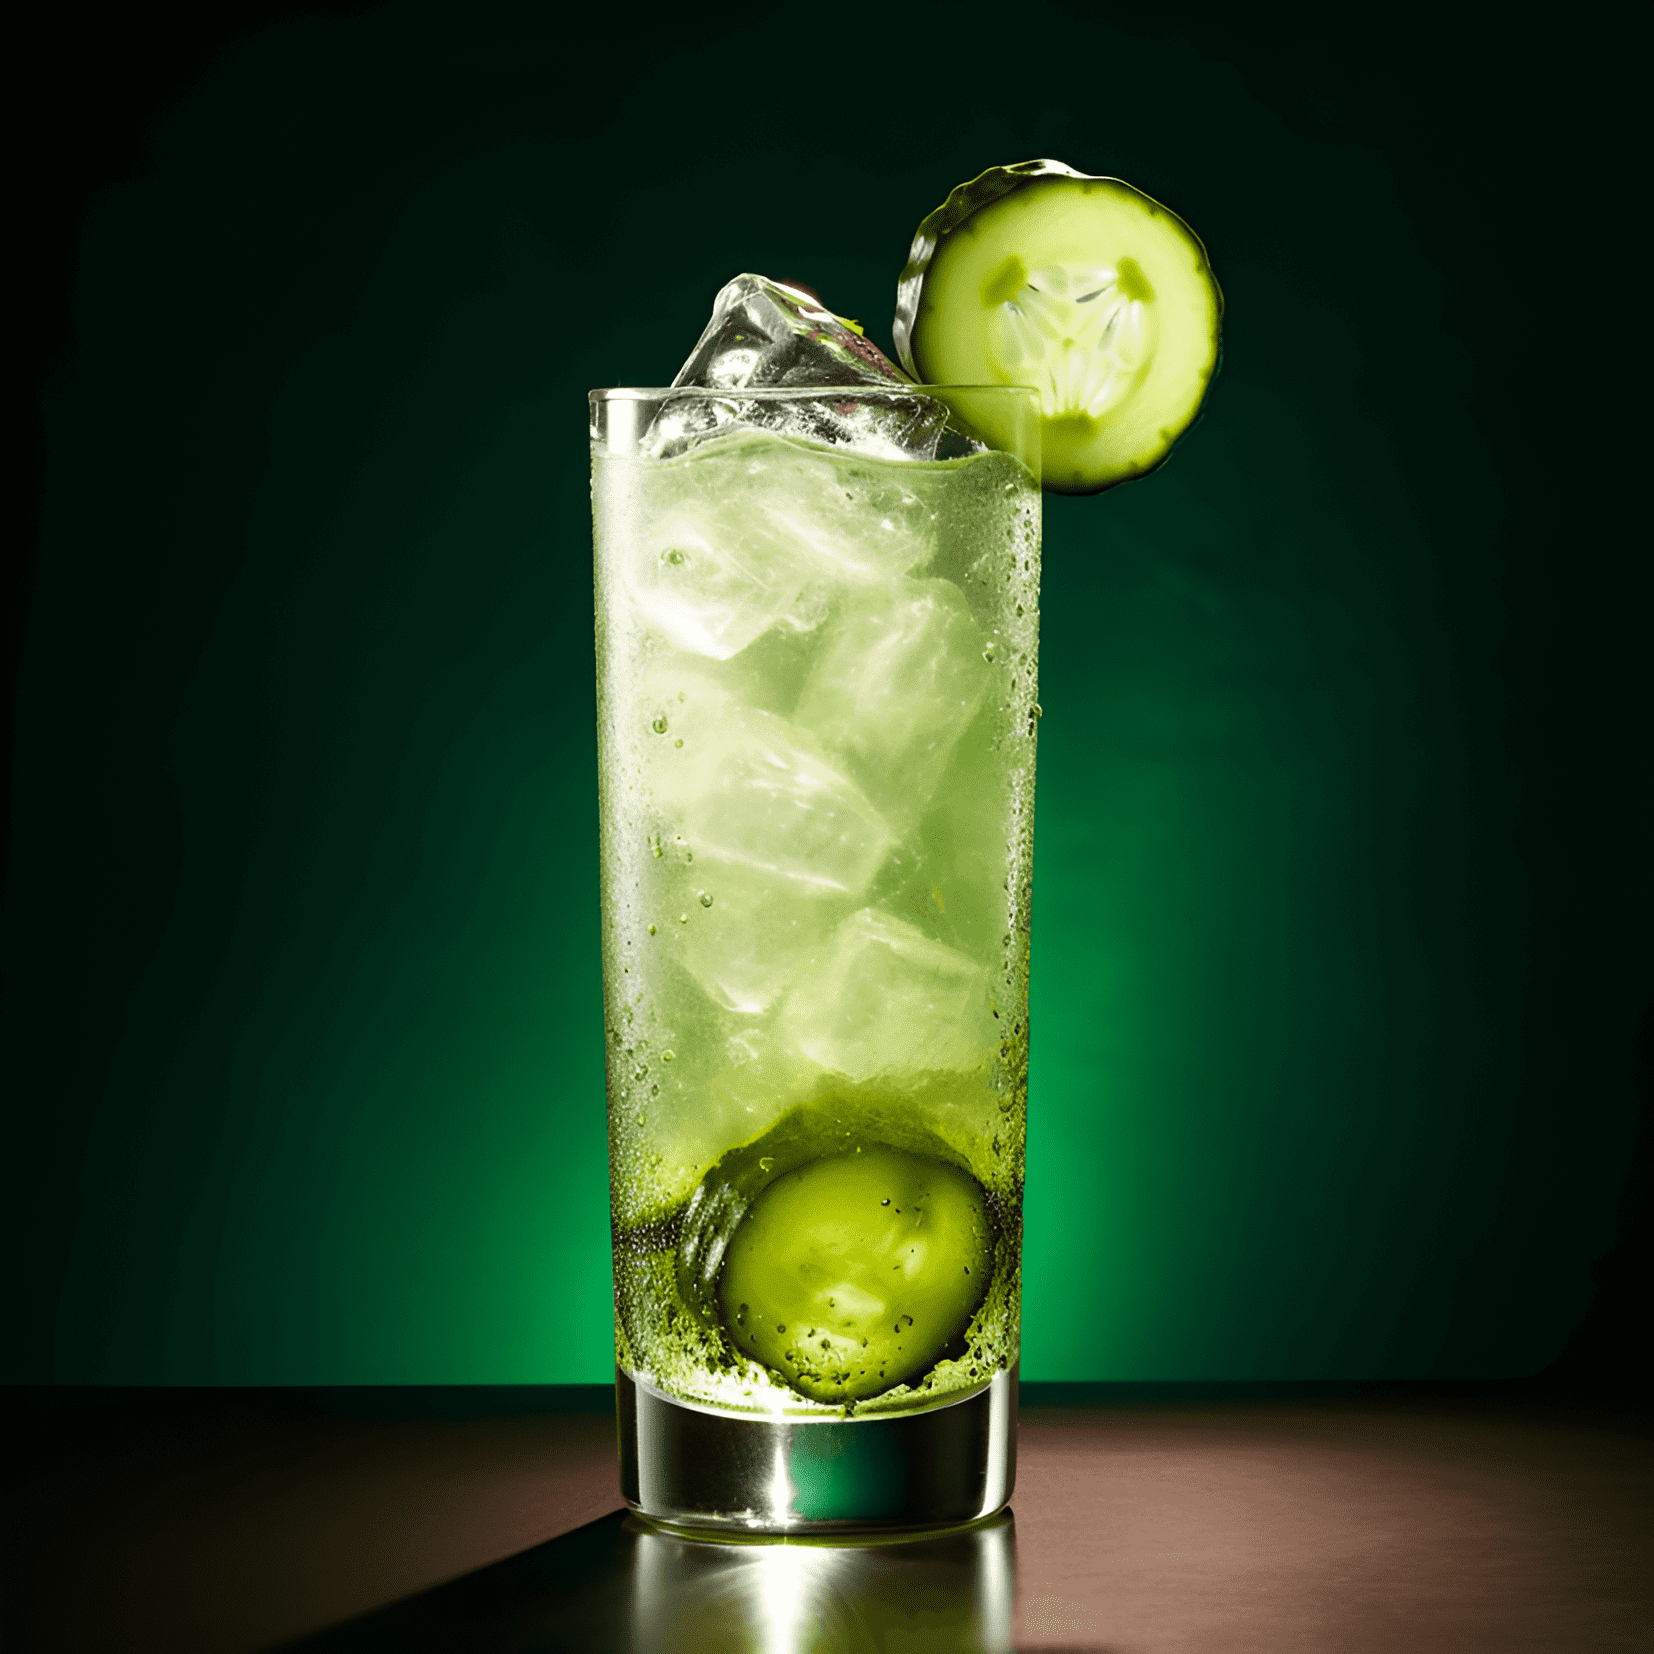 Southwest Cocktail Recipe - The Southwest cocktail is a complex and flavorful drink, with a spicy kick that lingers on the palate. It is both sweet and sour, with a hint of smokiness from the mezcal. The heat from the jalapeño is balanced by the cooling freshness of the cucumber and lime, making it a refreshing and invigorating drink.